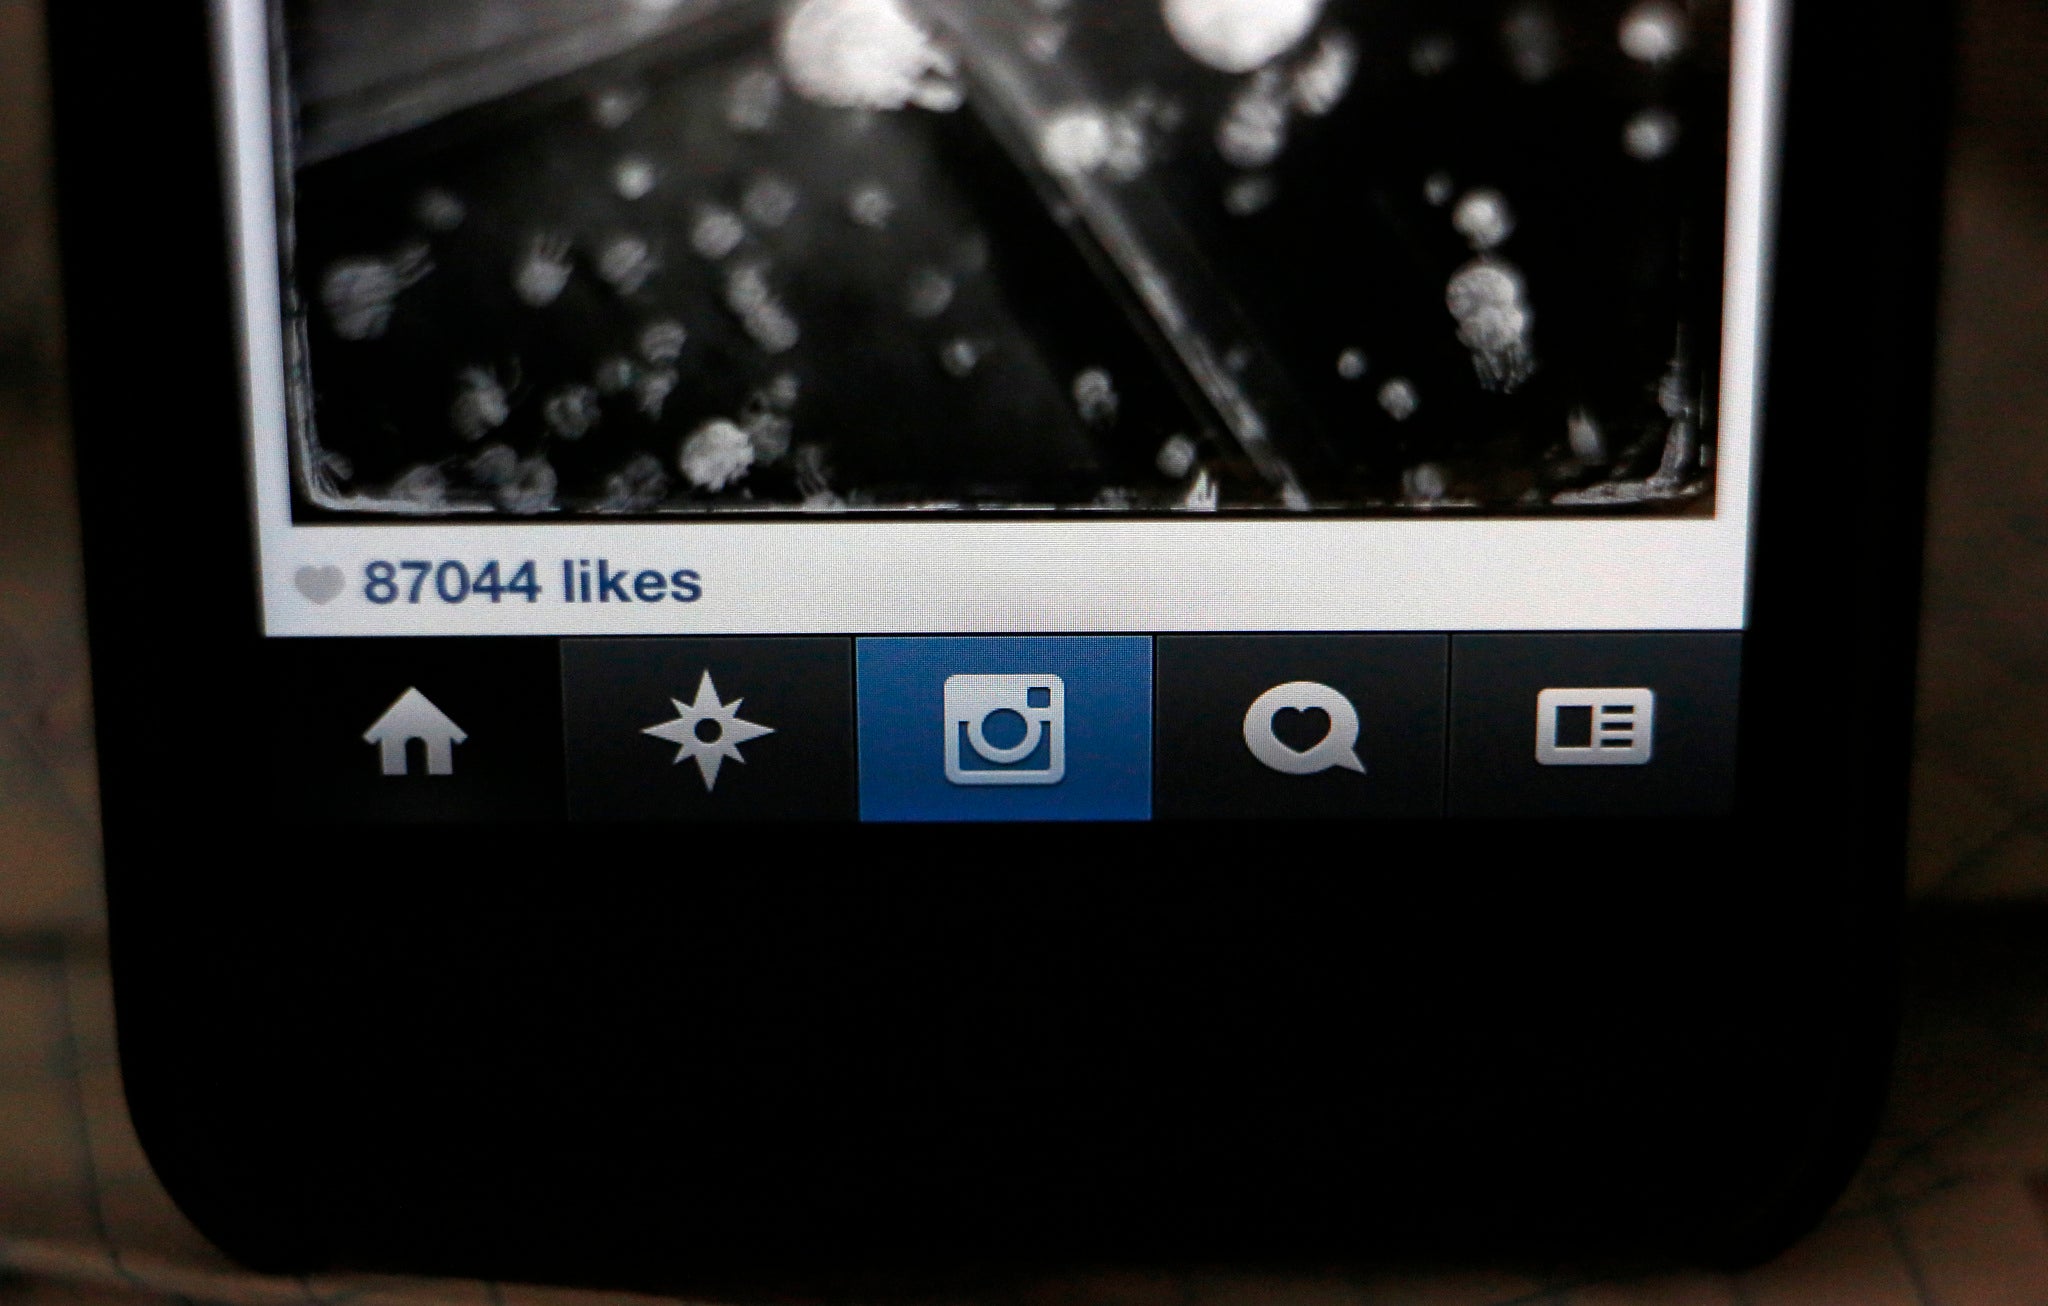 The number of likes on an Instagram photo are pictured on a mobile device screen in Pasadena, California August 14, 2013.